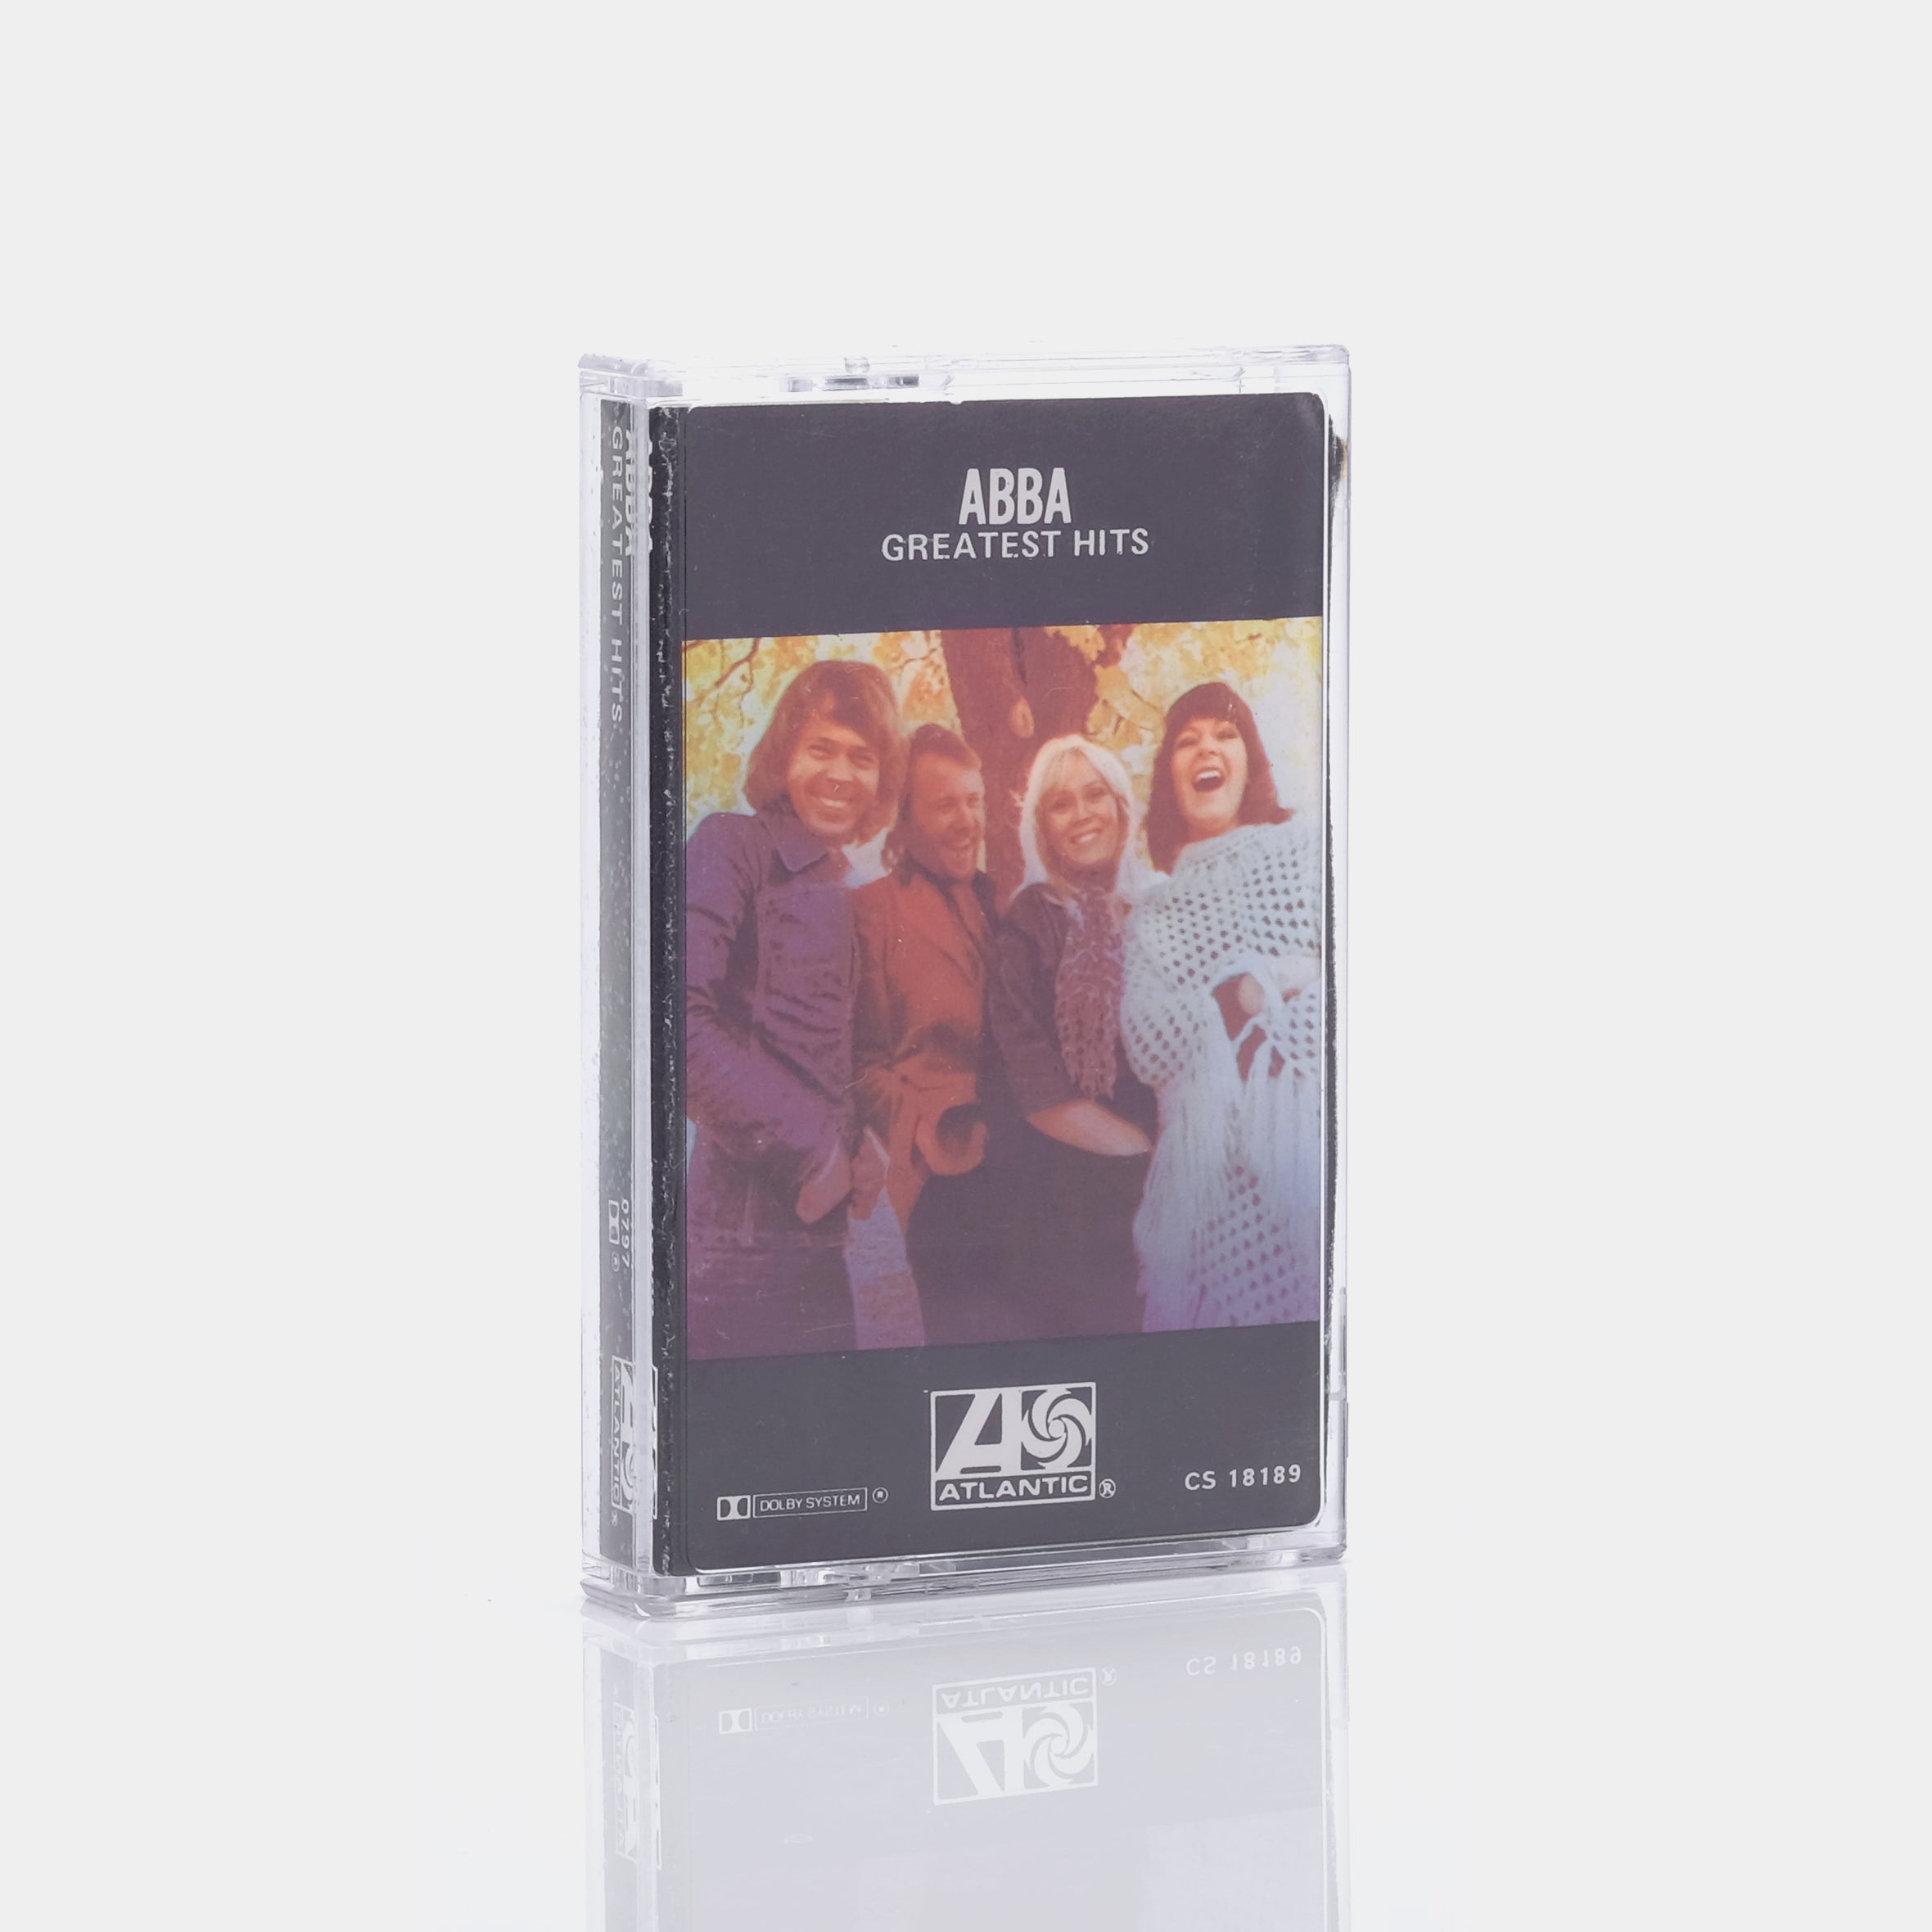 ABBA - Greatest Hits Cassette Tape